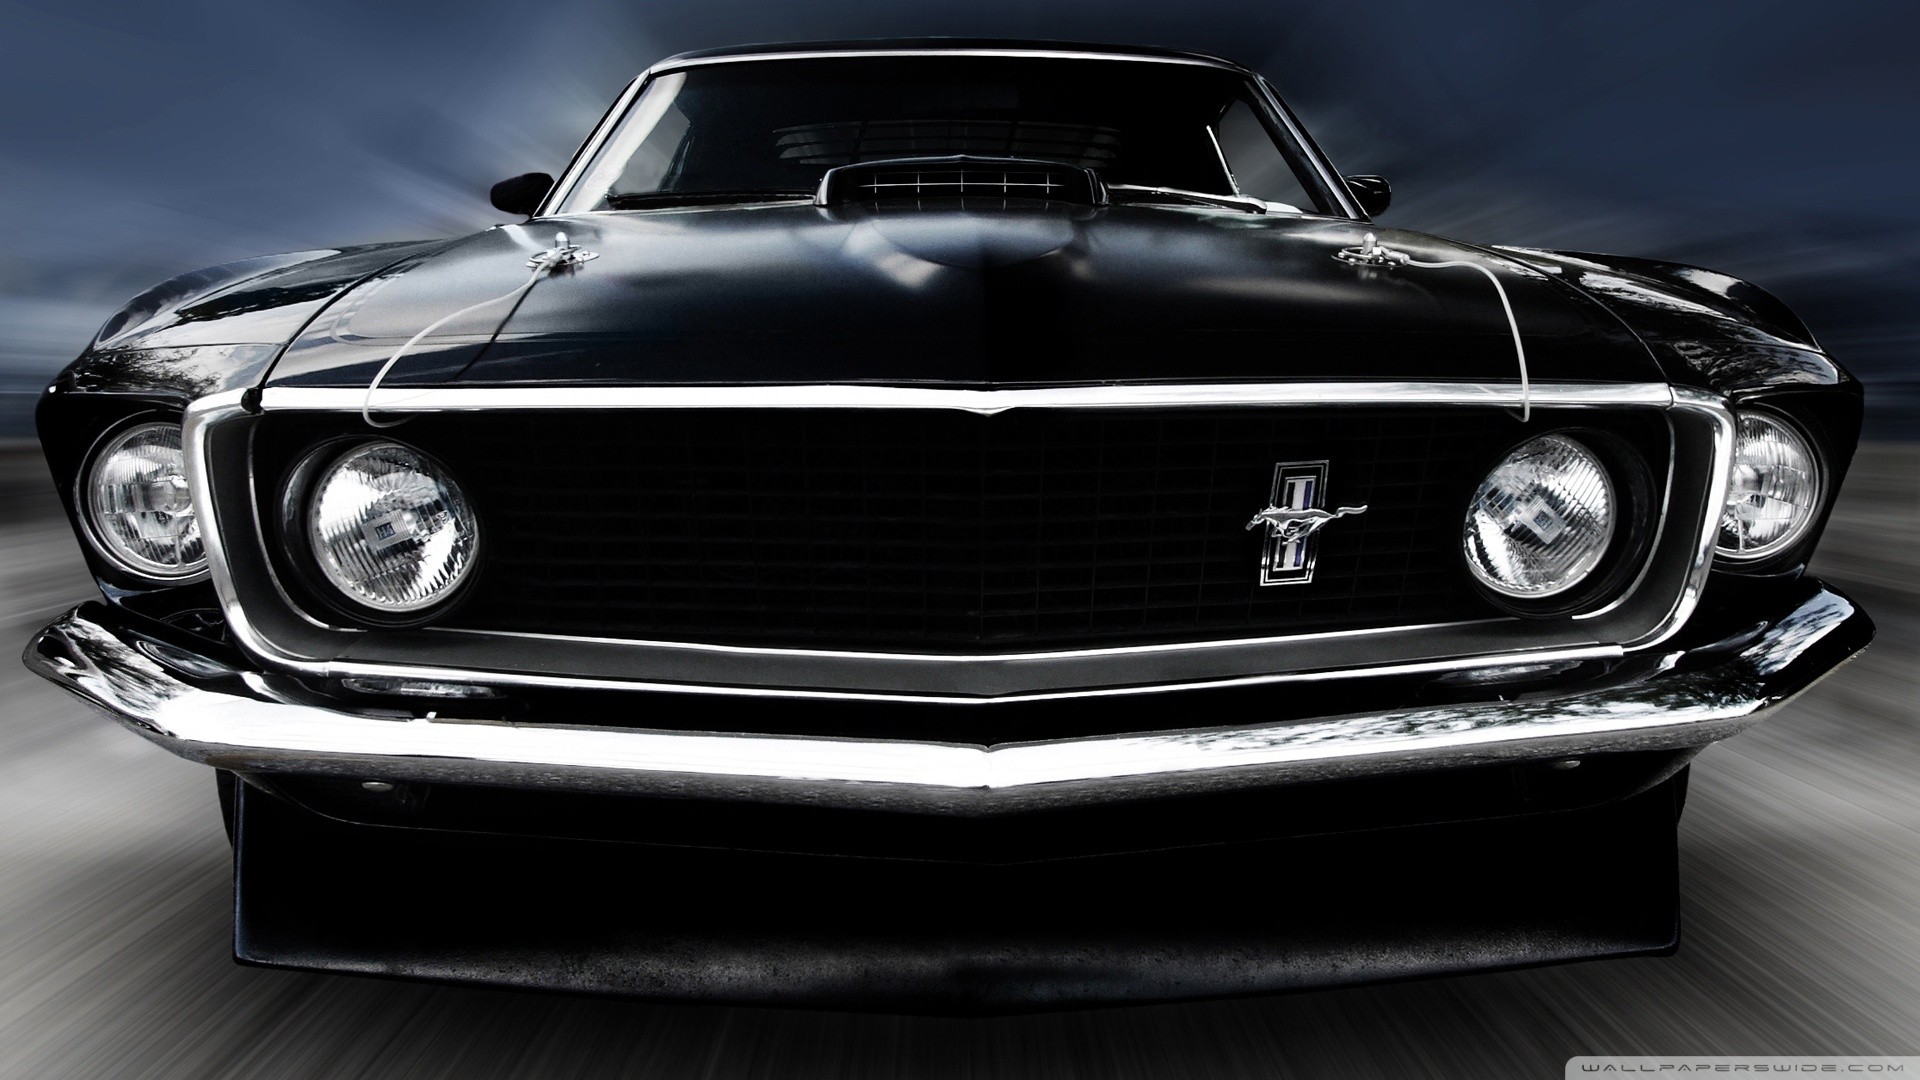 Wallpapers Muscle Cars - Wallpaper Zone